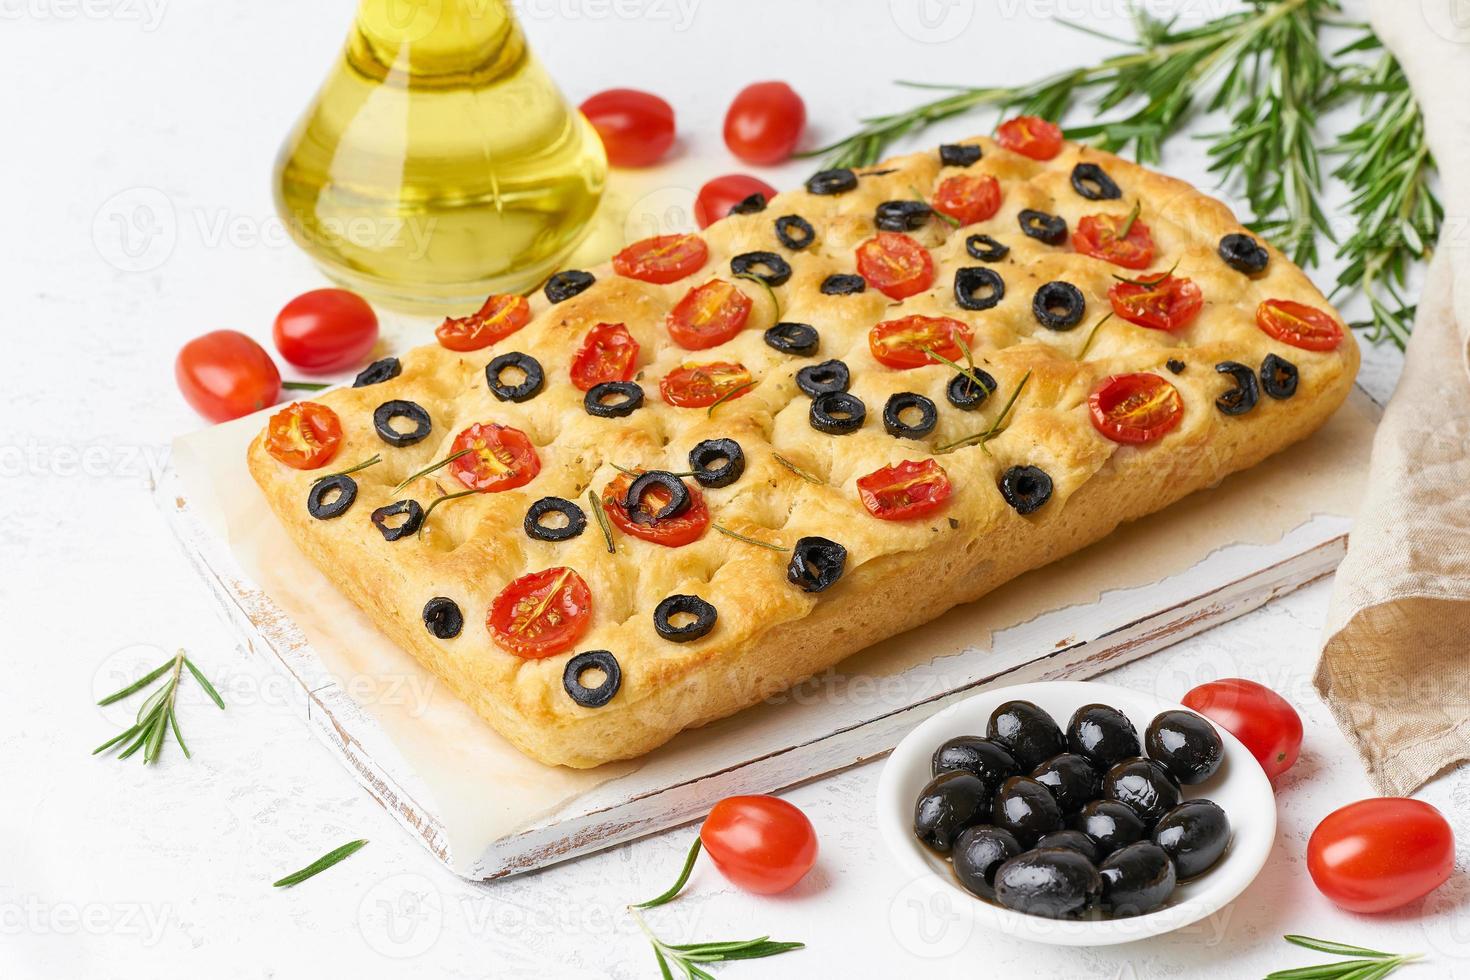 Focaccia with tomatoes, olives and rosemary. Whole Italian flat bread, bottle with oil photo